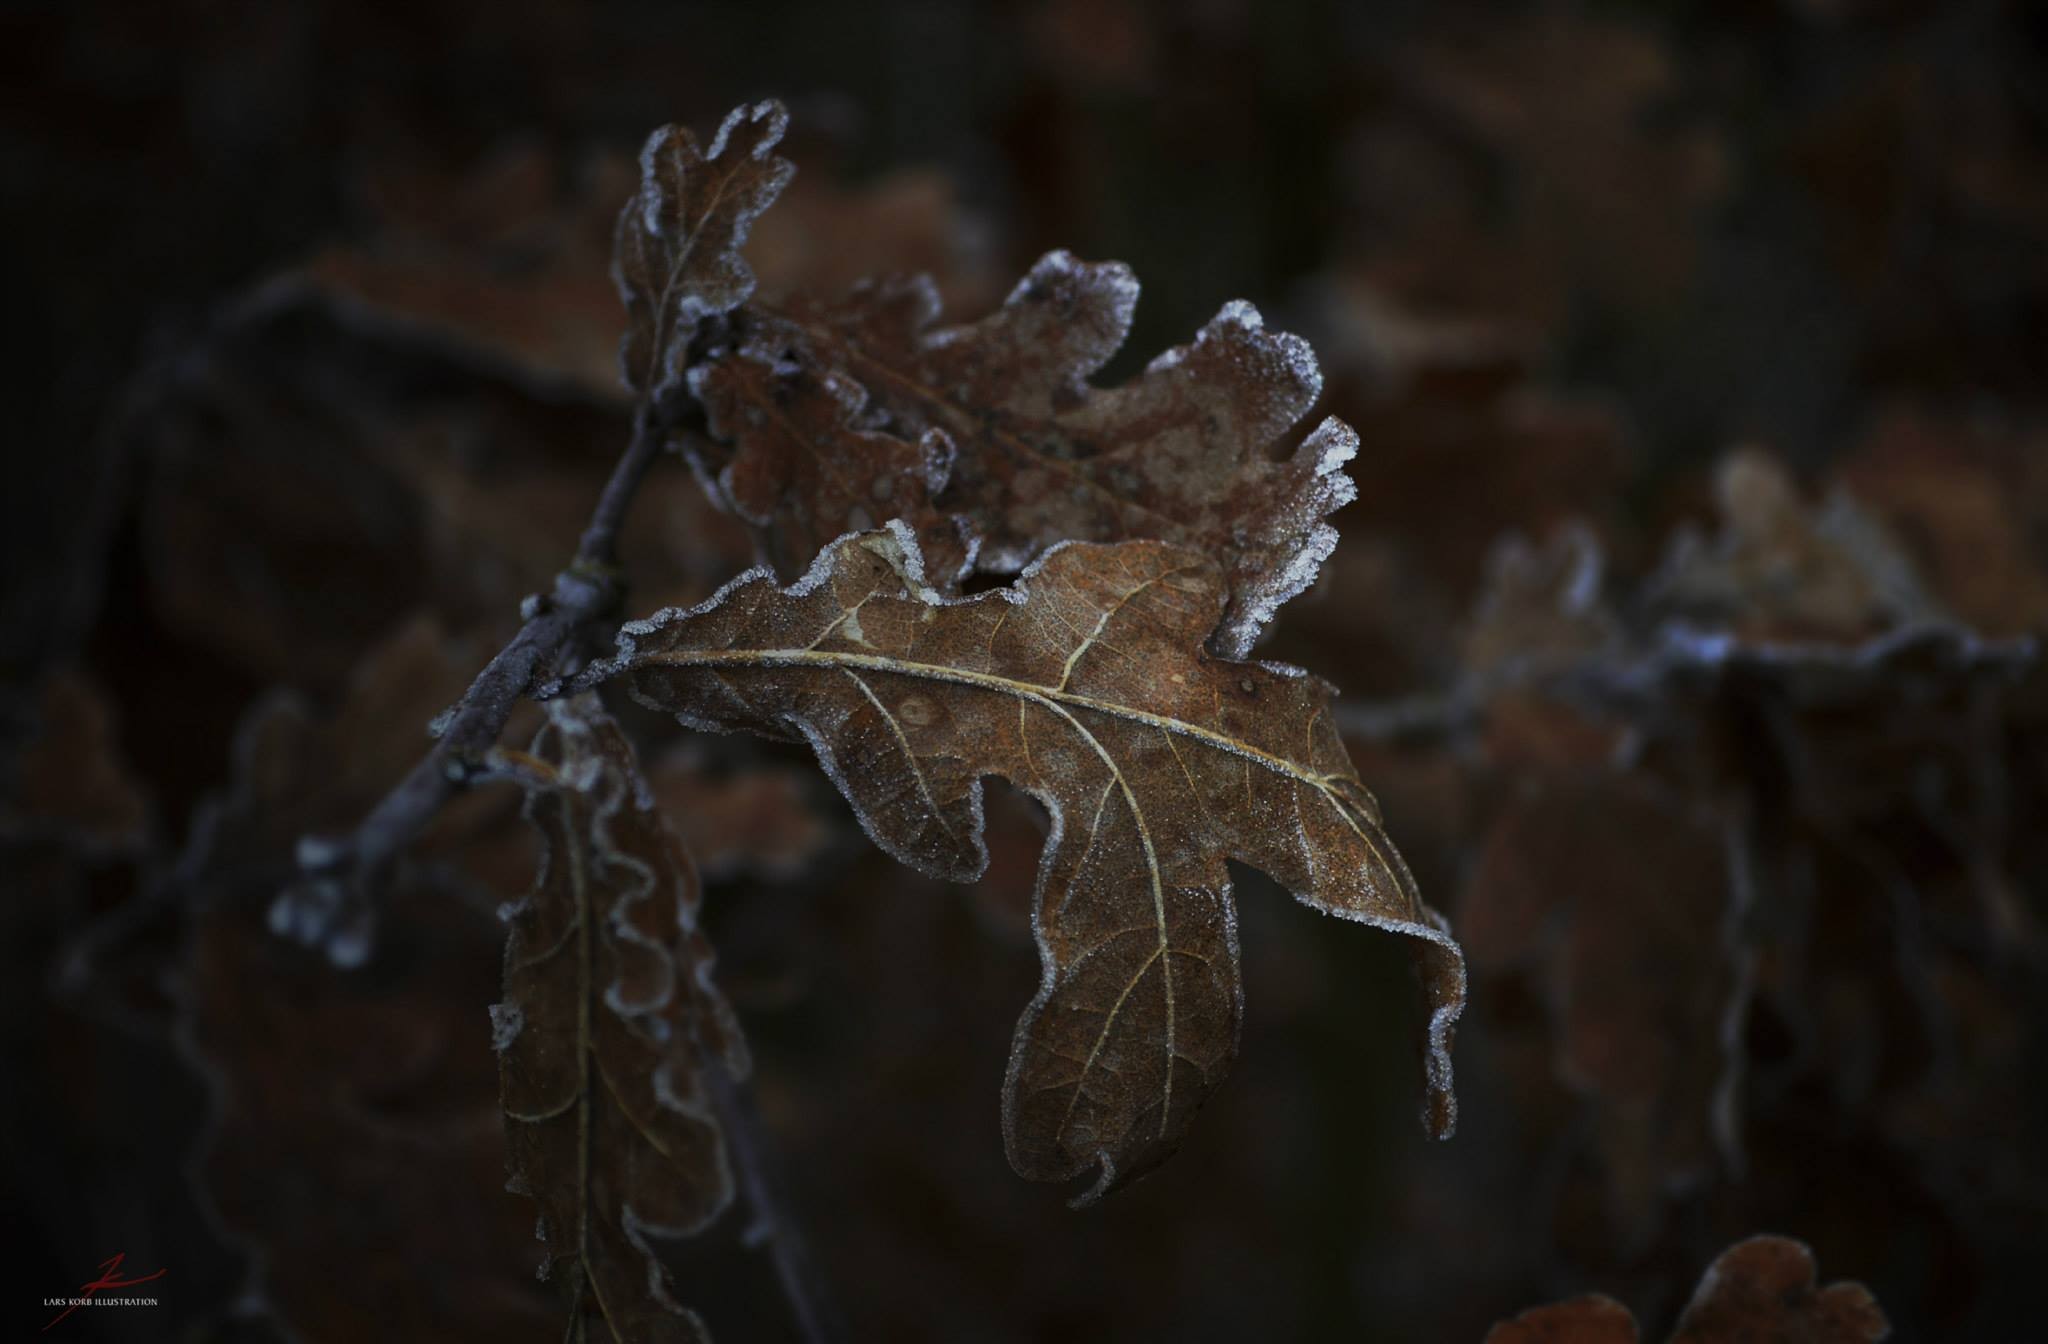 General 2048x1344 frost leaves plants winter ice outdoors closeup watermarked